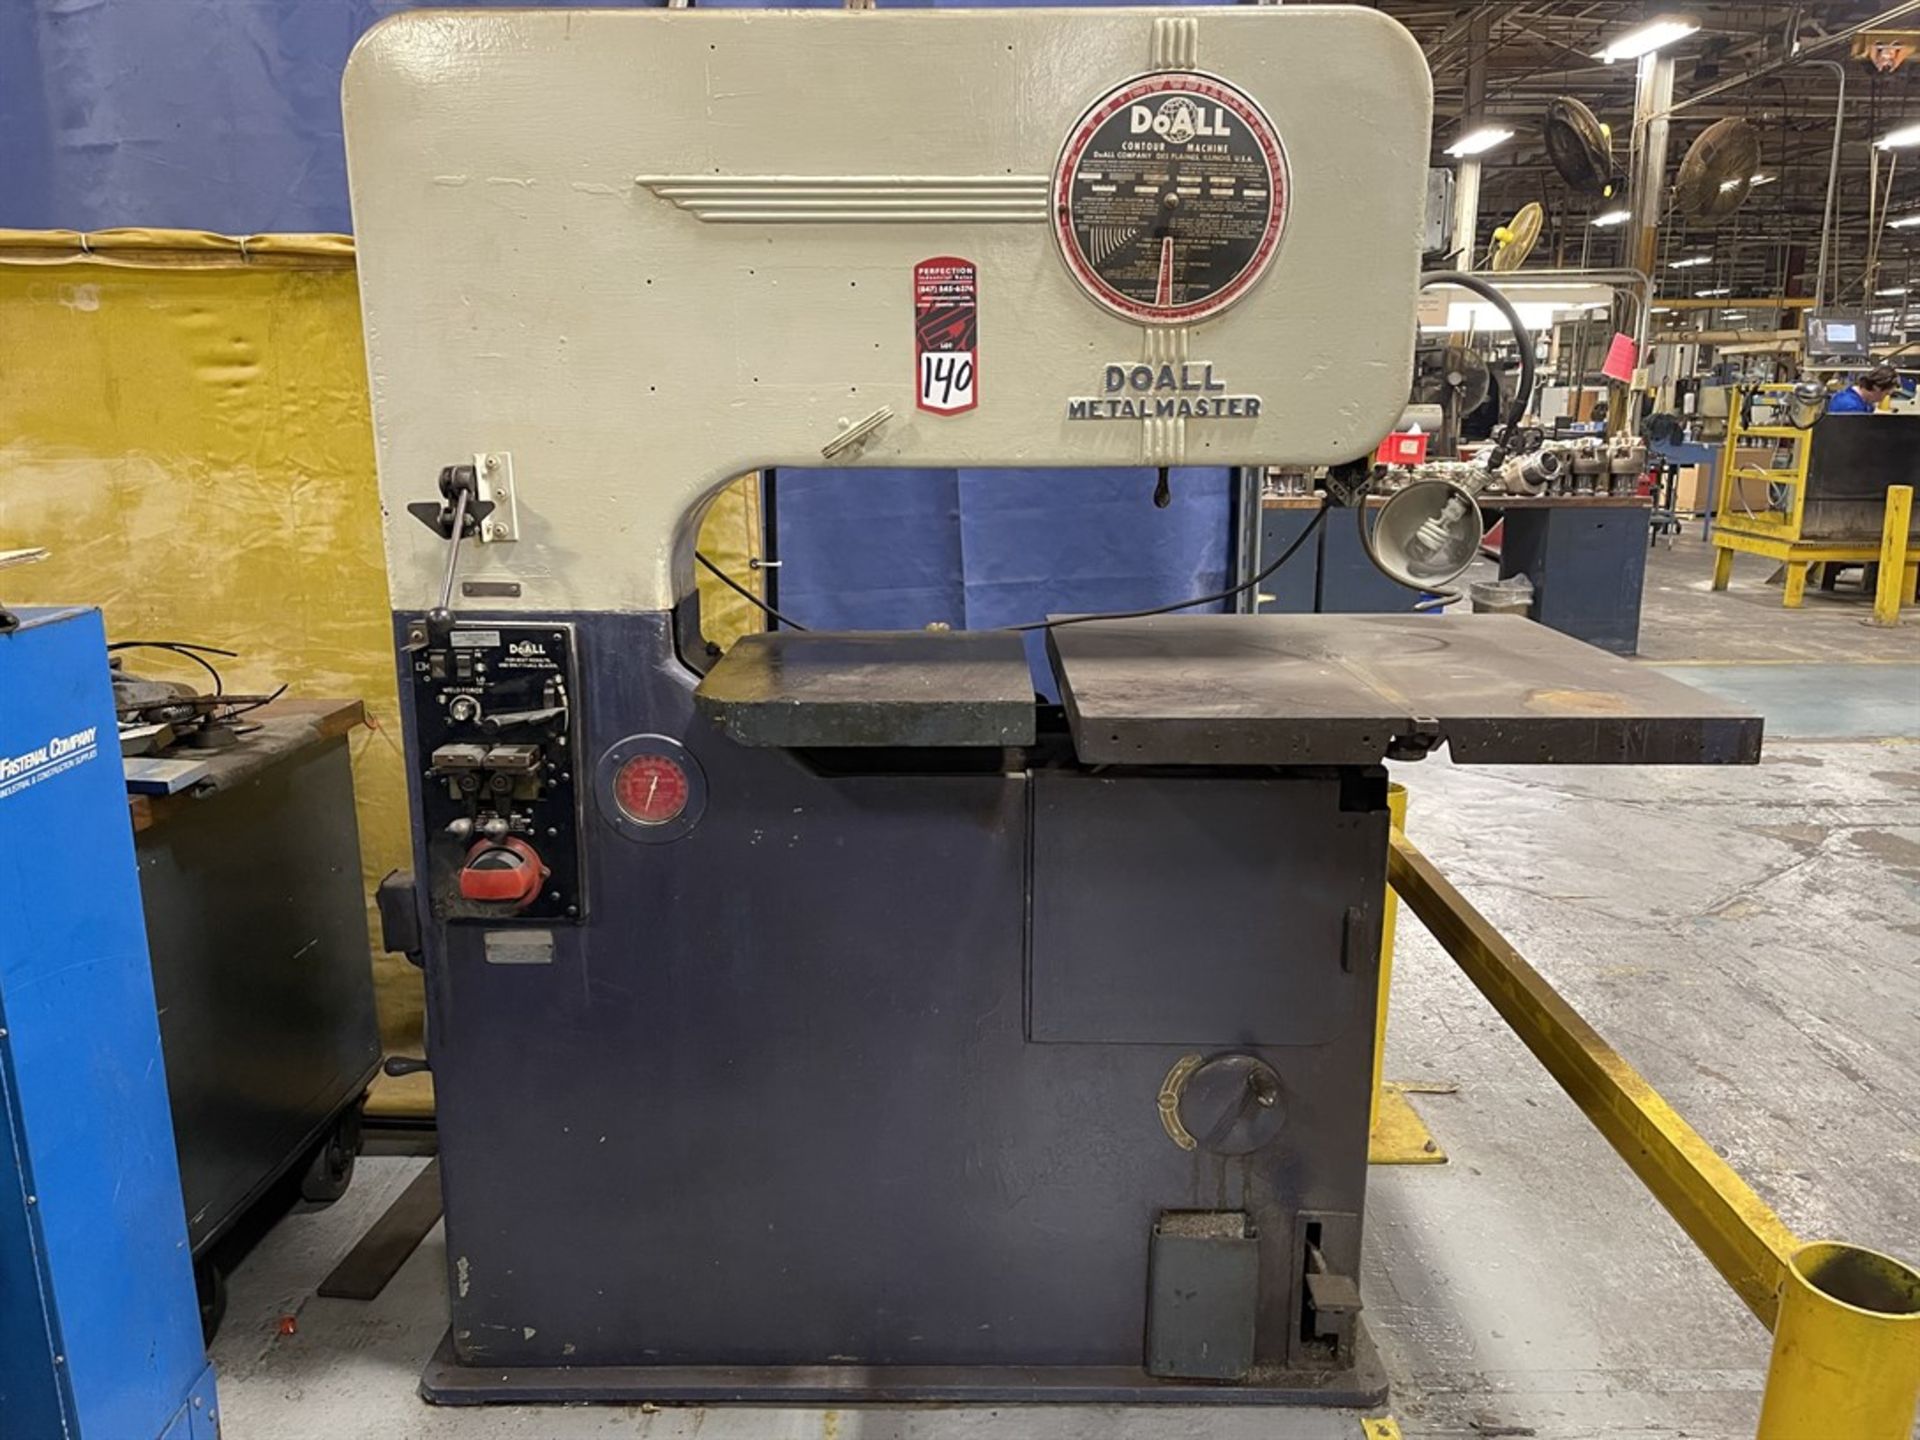 DOALL Metalmaster Vertical Bandsaw, s/n na, 36" Throat, 30" x 30" Power Feed, Table, 17" x 20" Table - Image 2 of 5